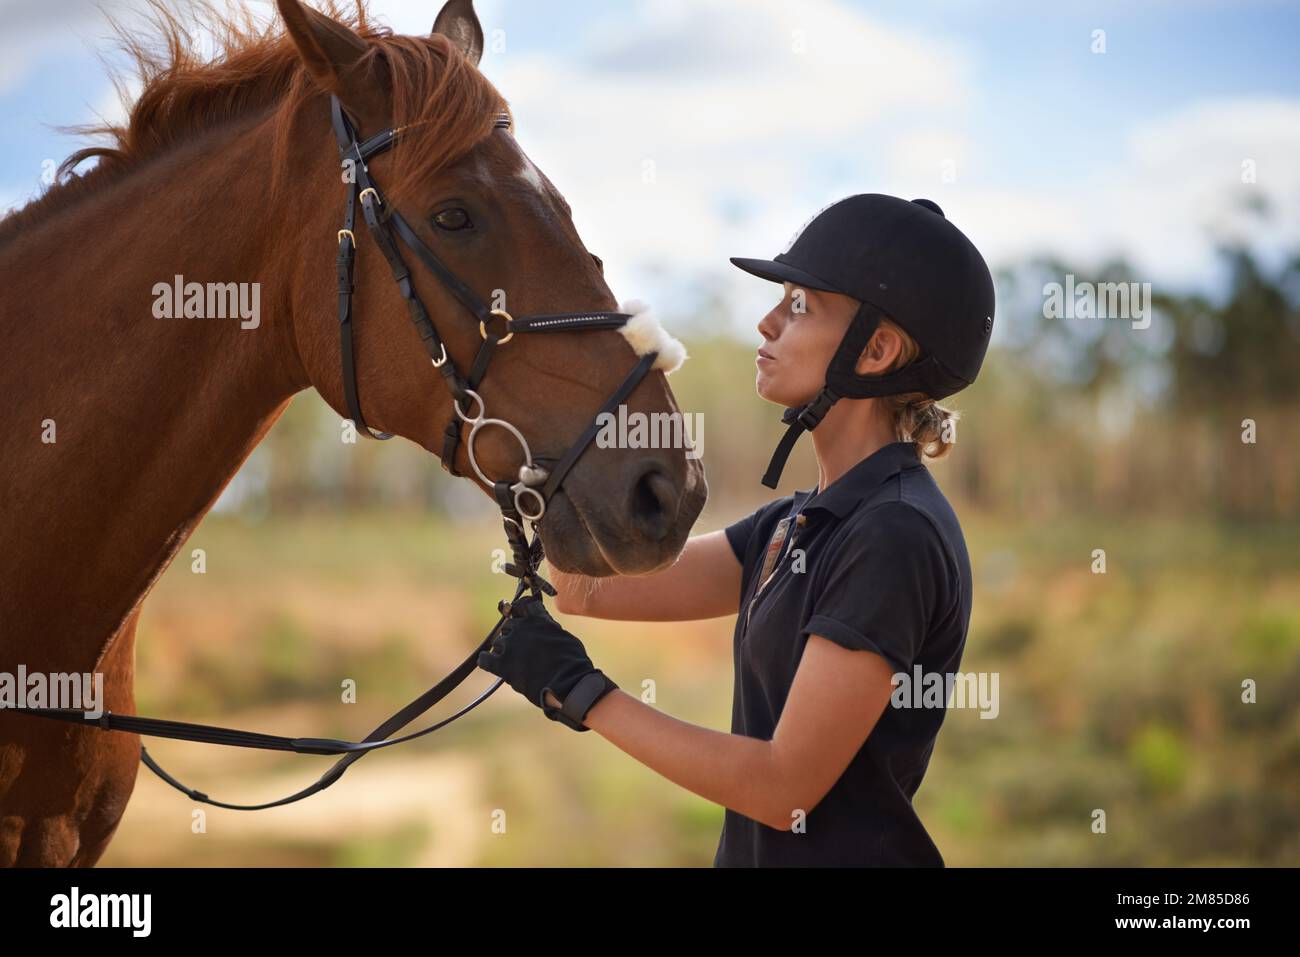 There is a bond between horse and rider. A young female rider being affectionate with her chestnut horse. Stock Photo